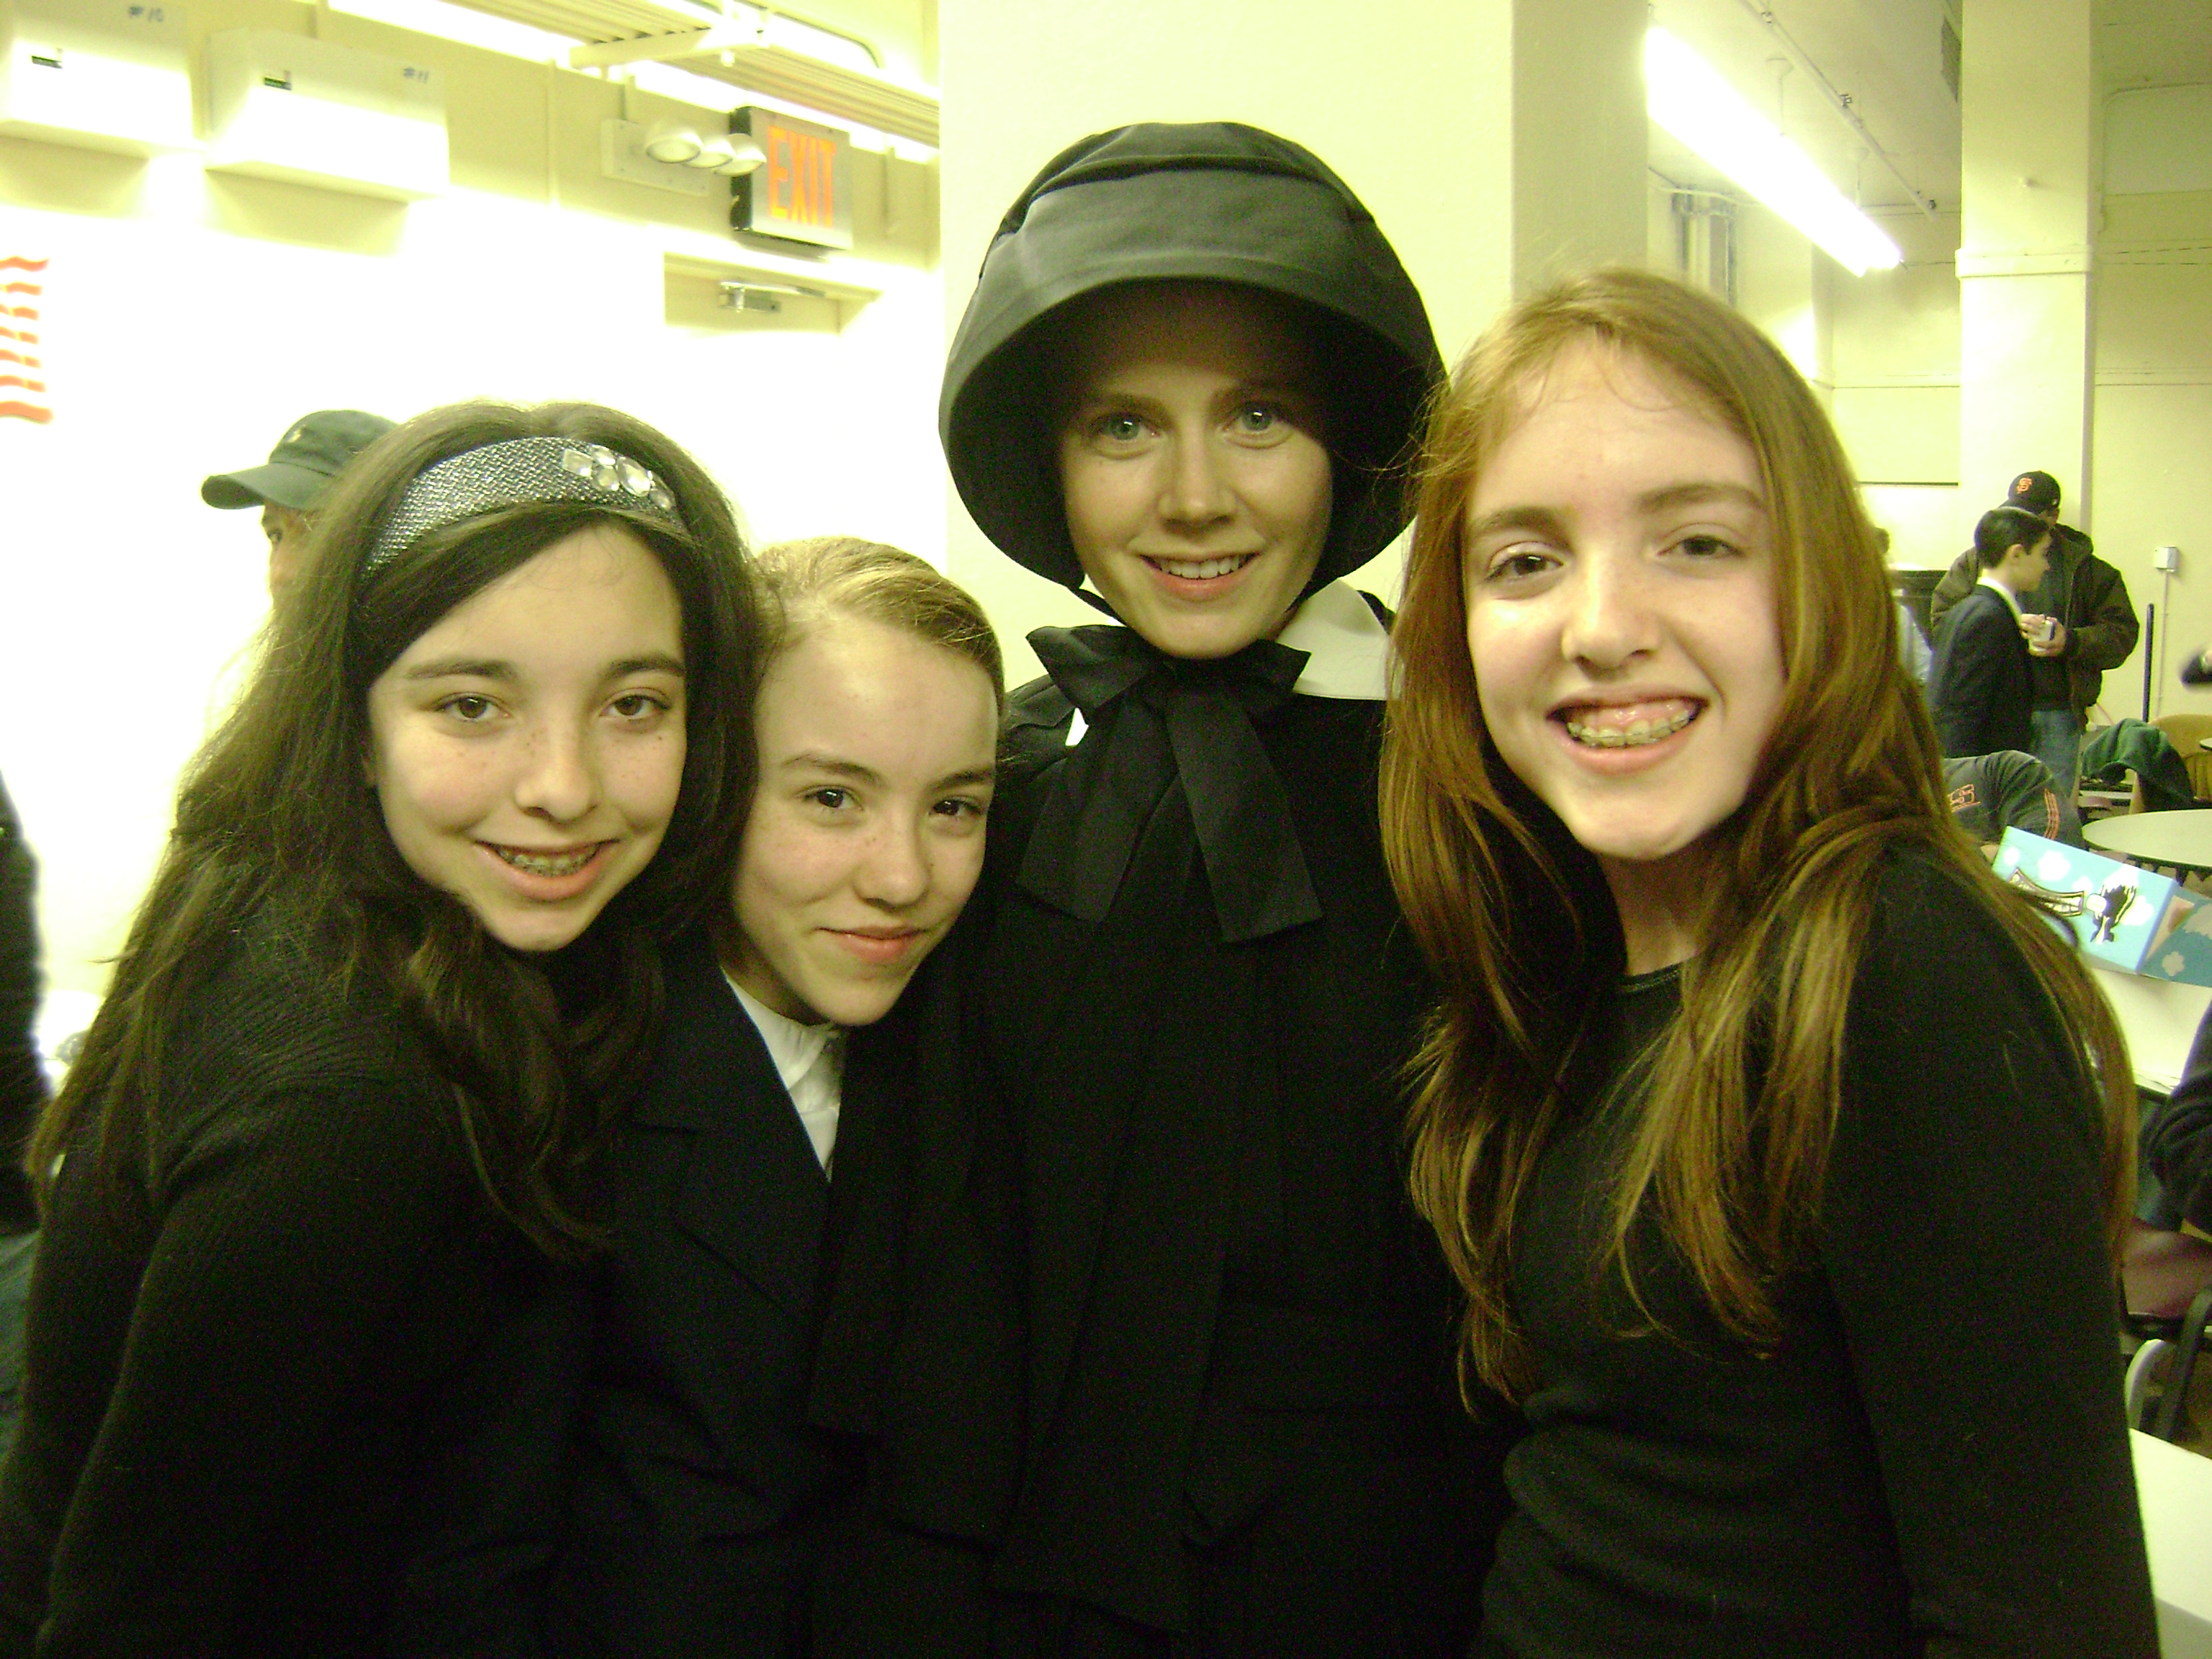 This was on the movie set DOUBT! This is me with my sisters and with Amy Adams!